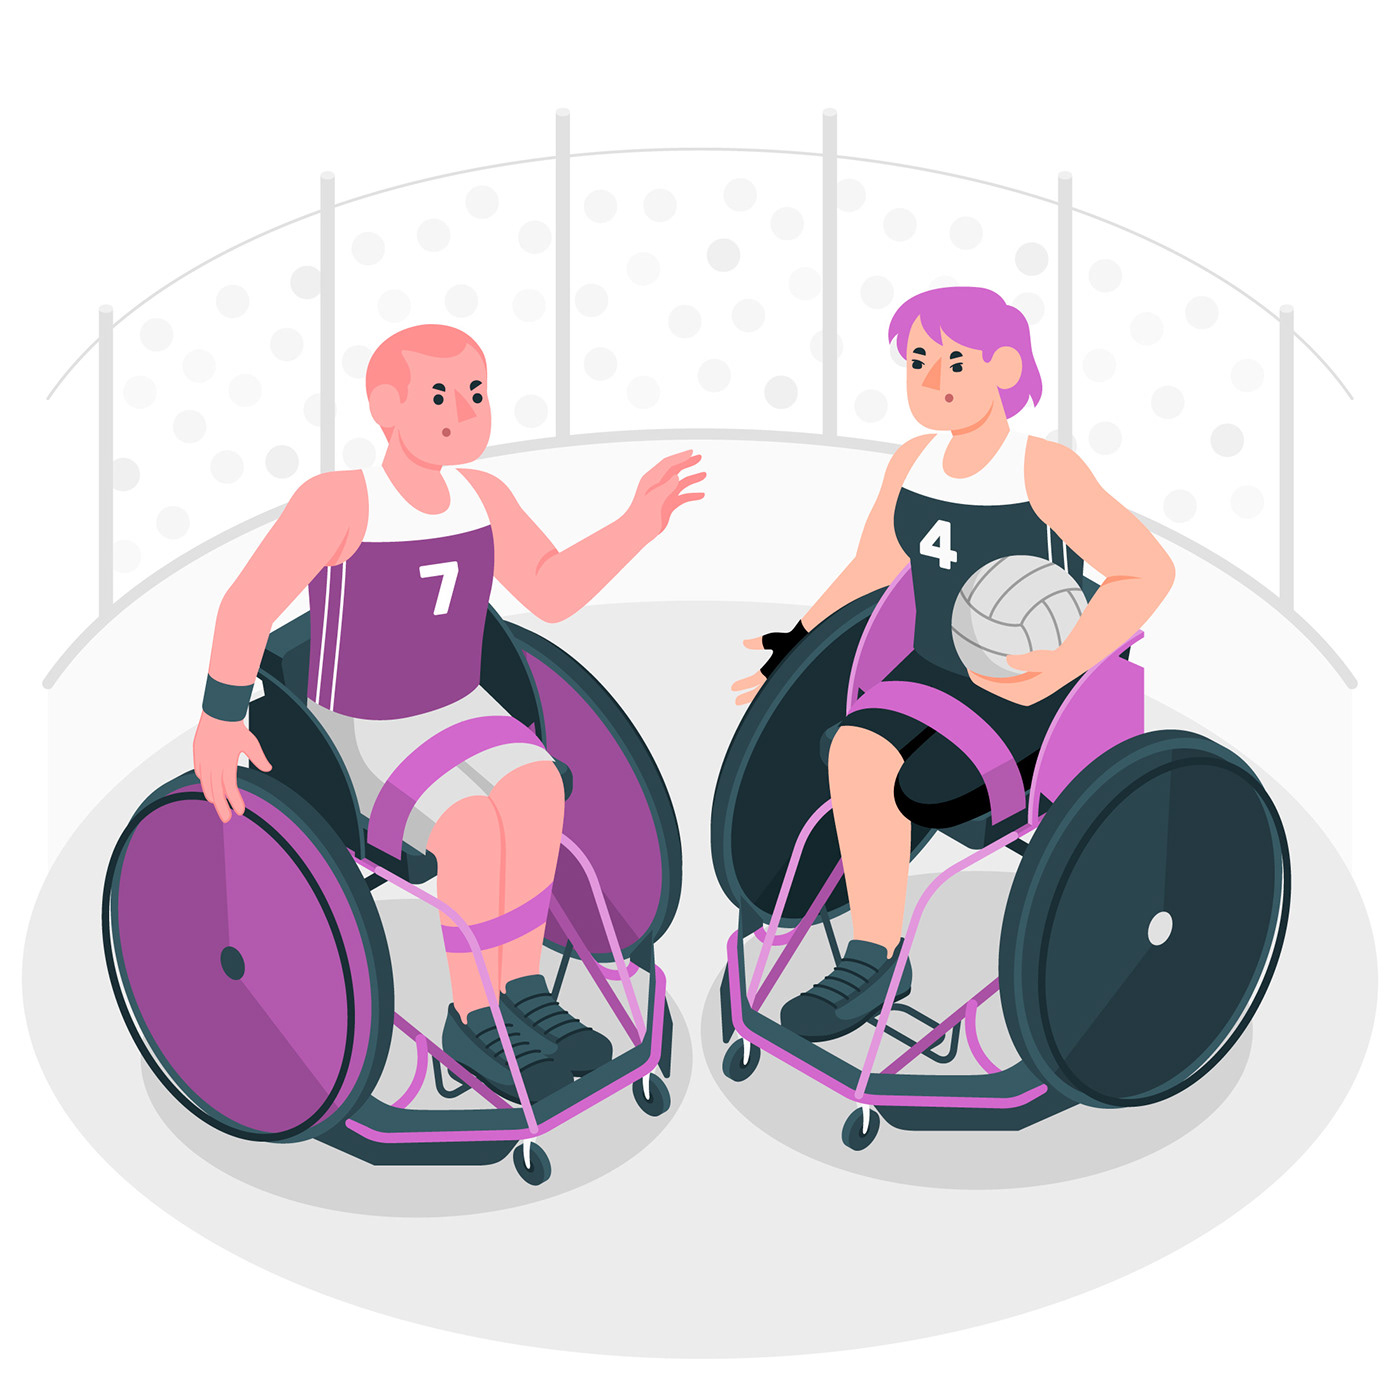 landing page vector sports paralympics Olympics wheelchair disabled people Isometric